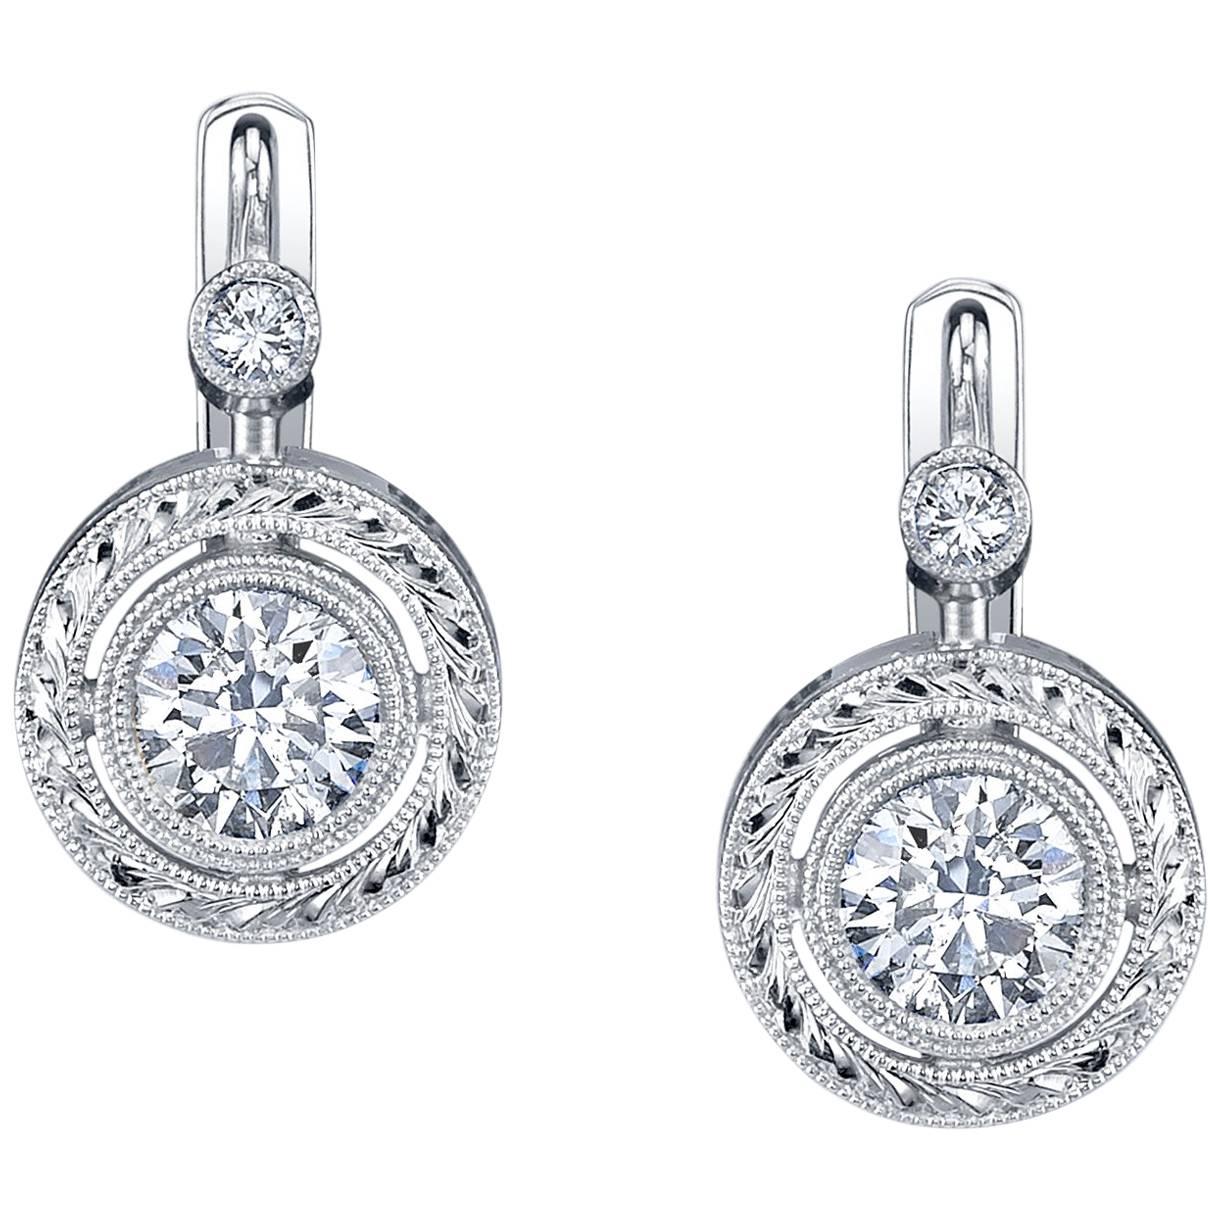 Diamond Drop Earrings in Engraved 18k White Gold, .56 Carat Total  For Sale